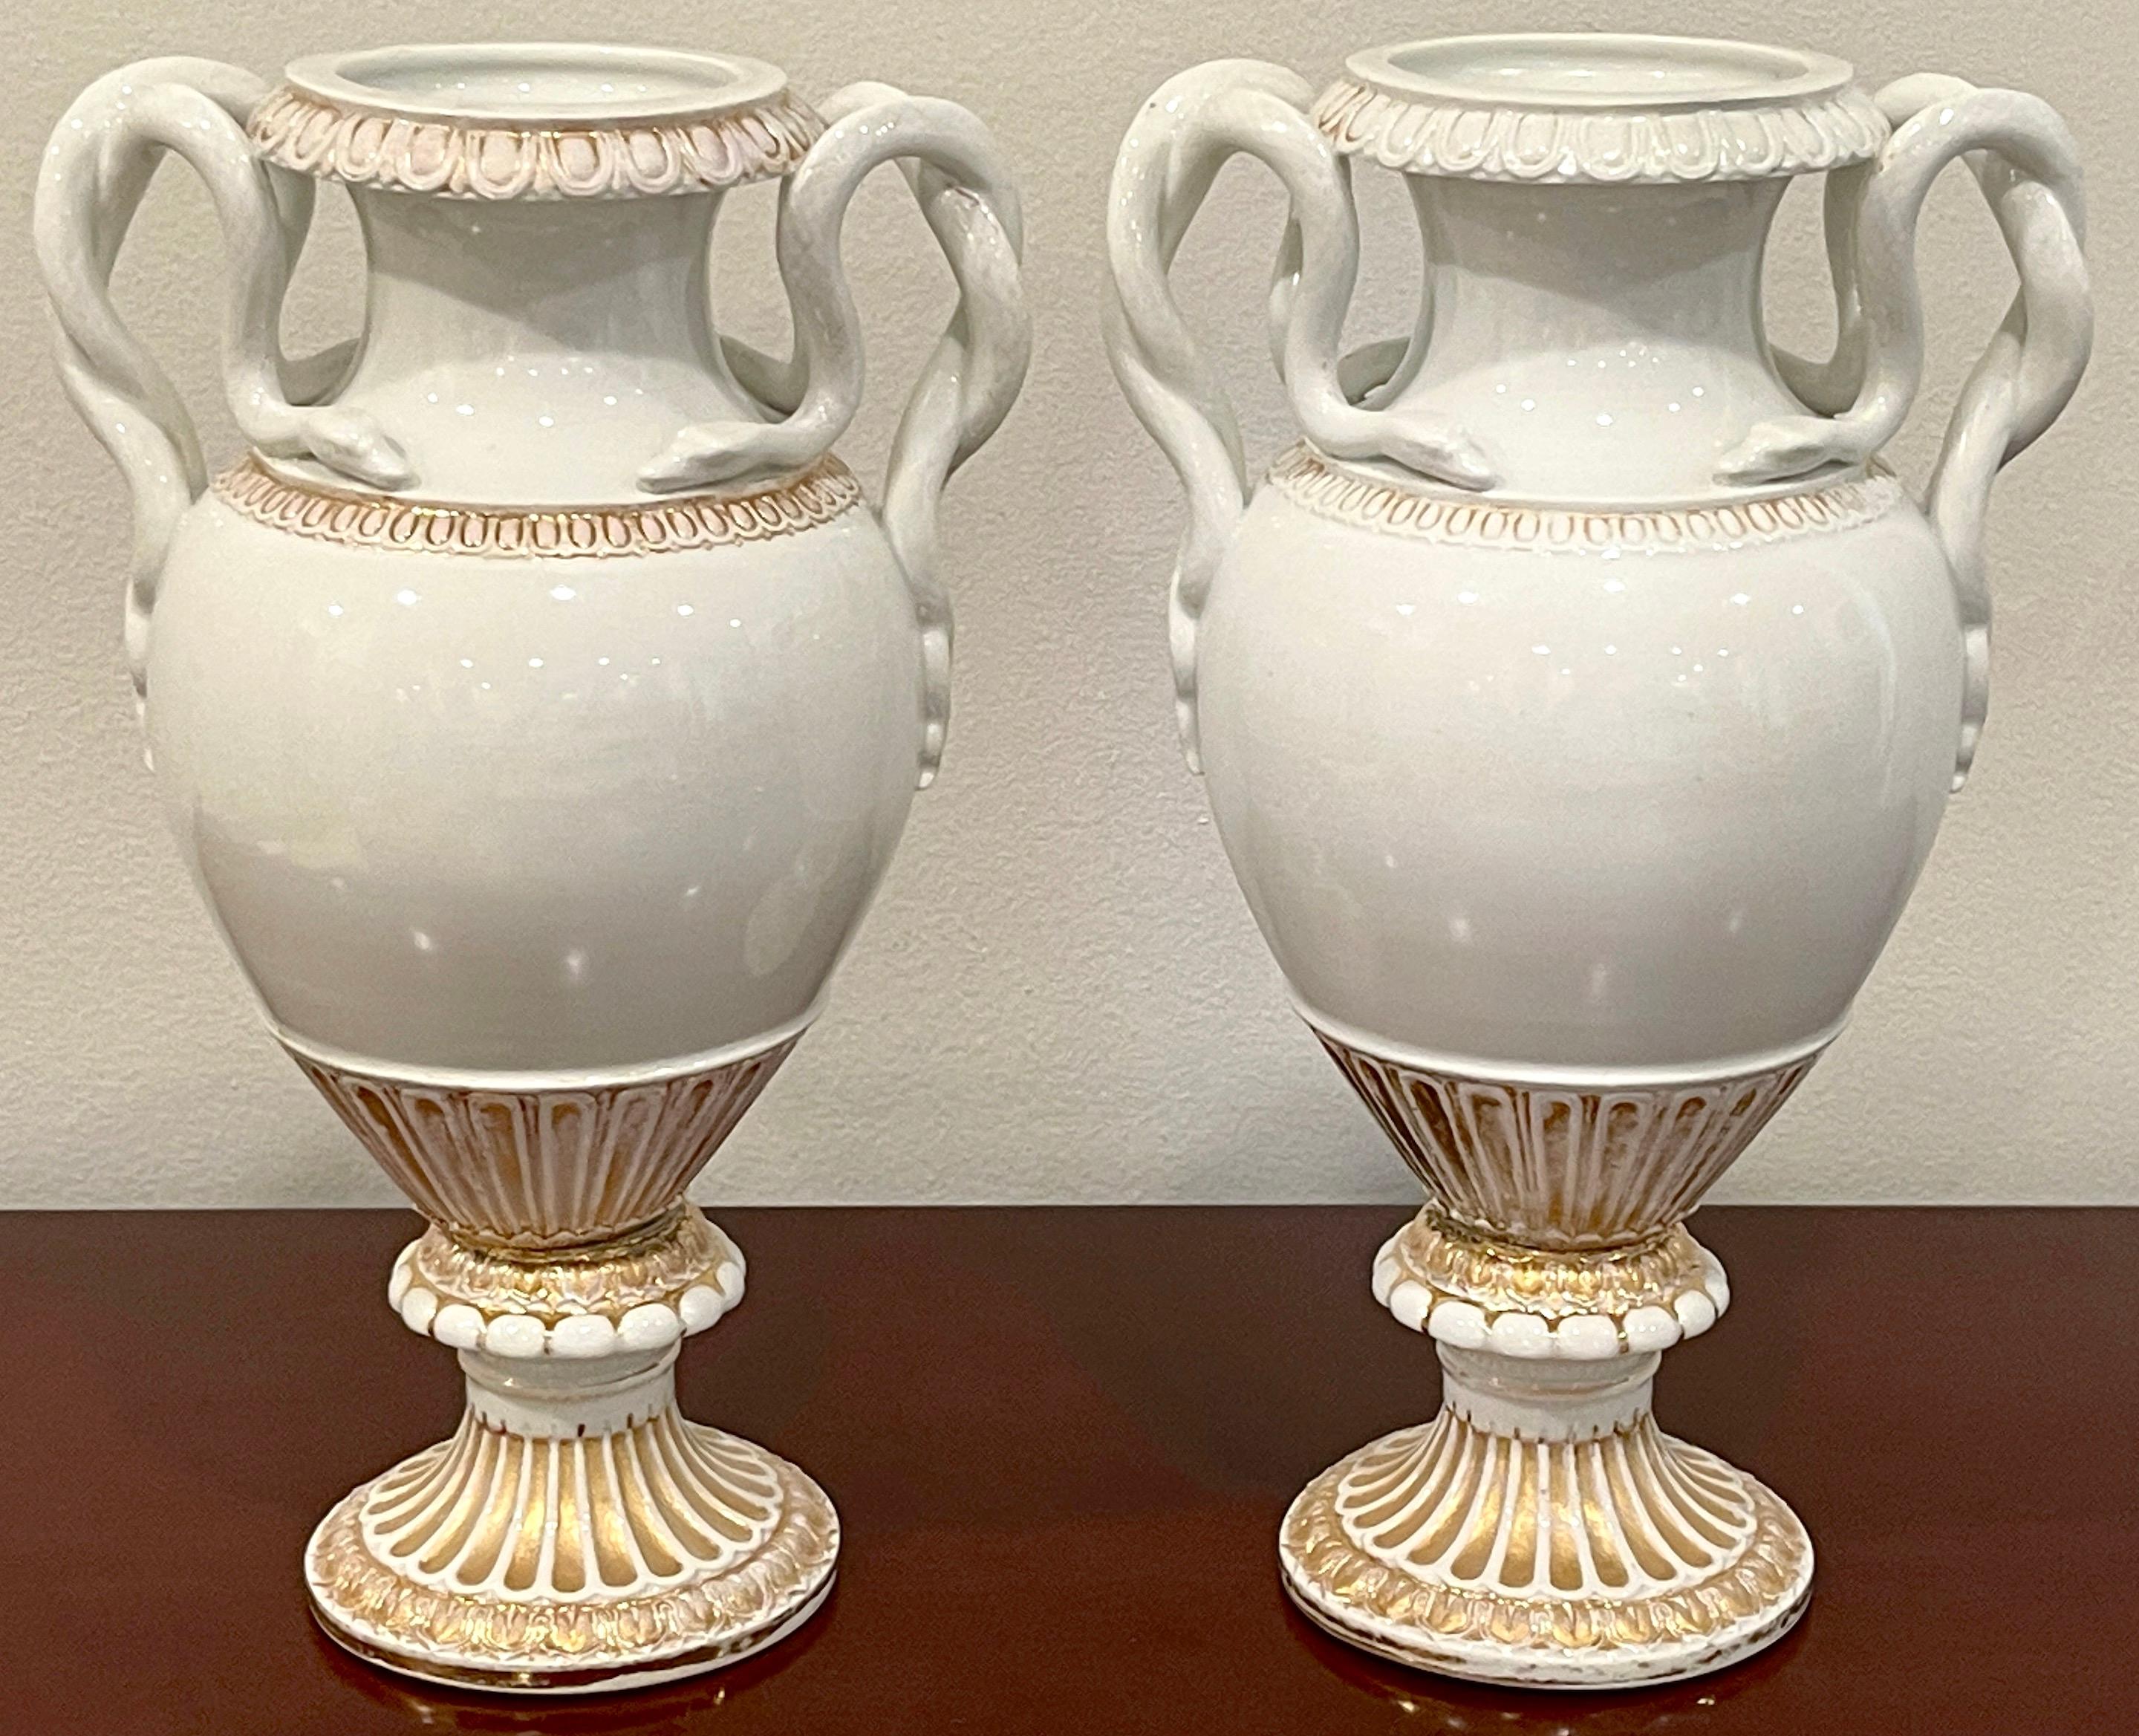 Porcelain Pair of 19th Century Meissen Gold & White Neoclassical Serpent Handled Vases For Sale